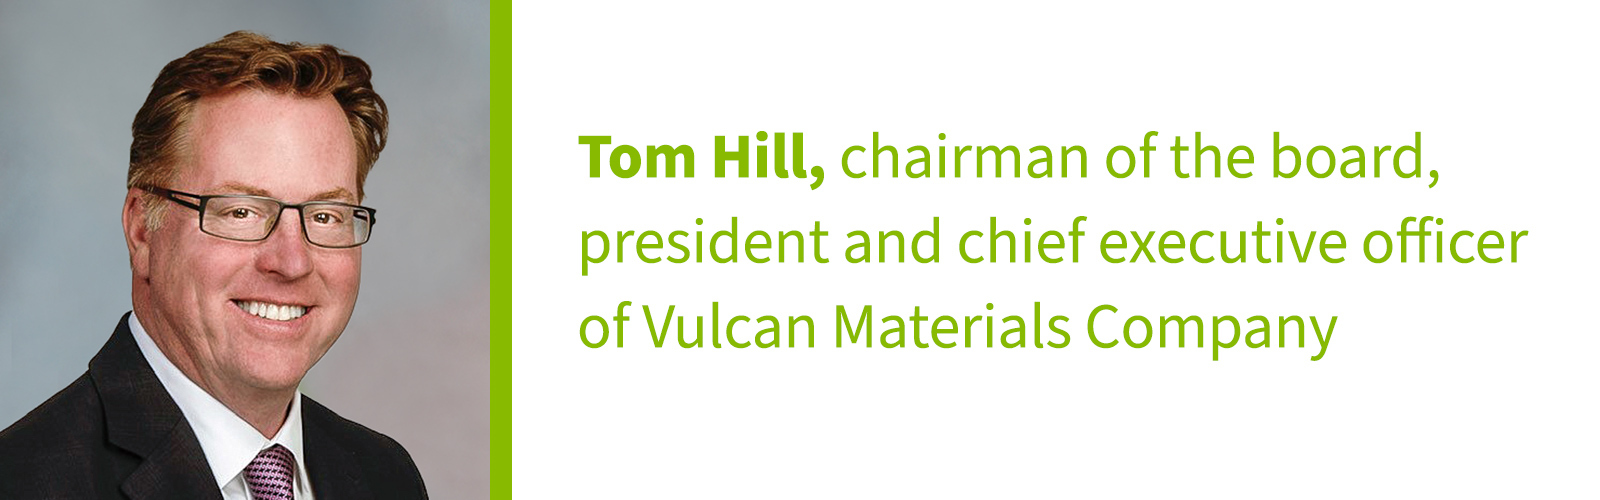 Tom Hill: chairman of the board, president and chief executive officer of Vulcan Materials Company